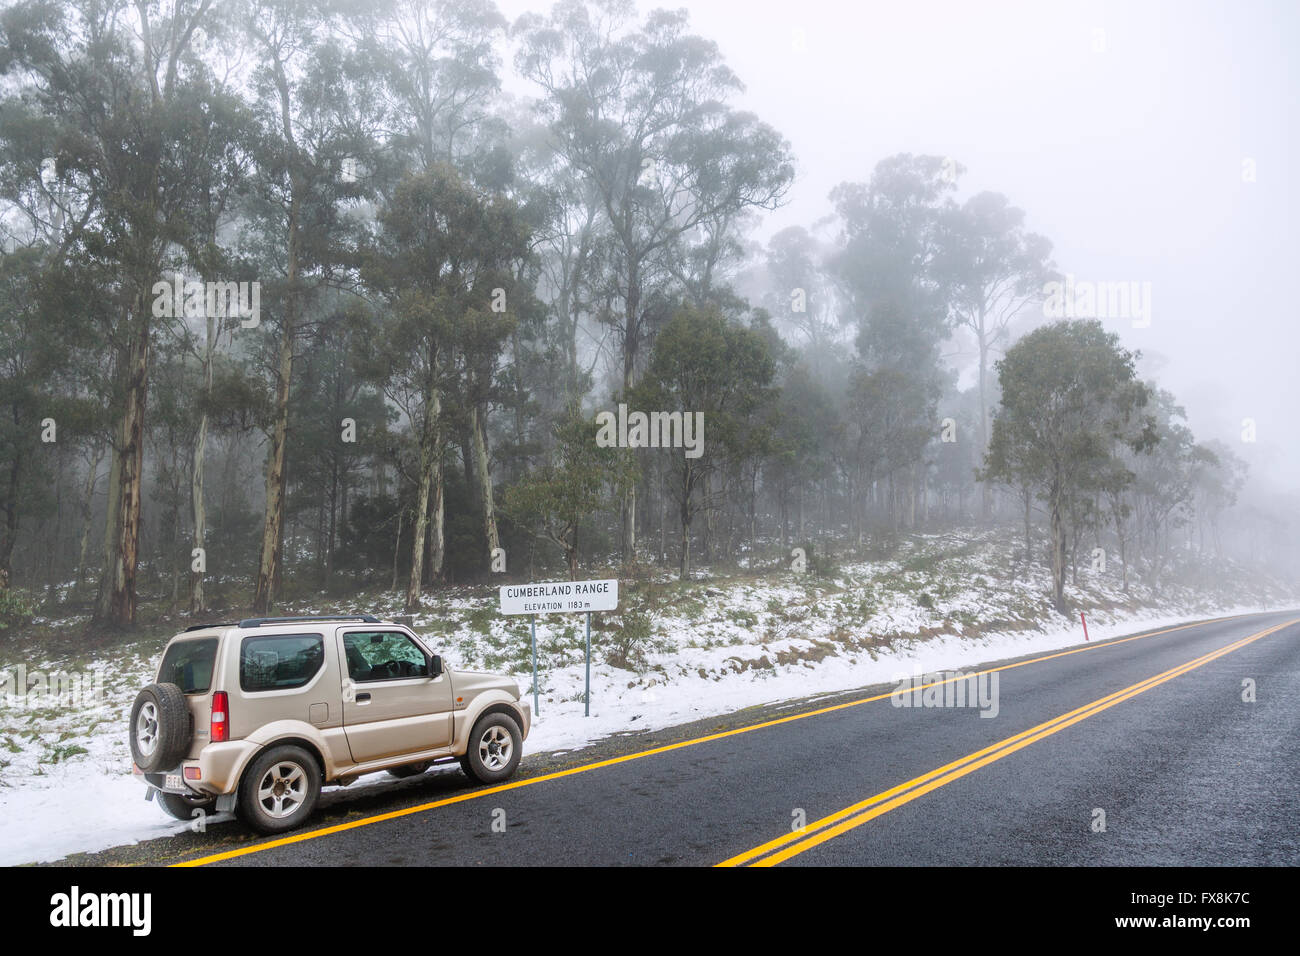 Australia, New South Wales, Kosciusko National Park, winter view of the Snowy Mountains Highway at Cumberland Range 1183 metres Stock Photo